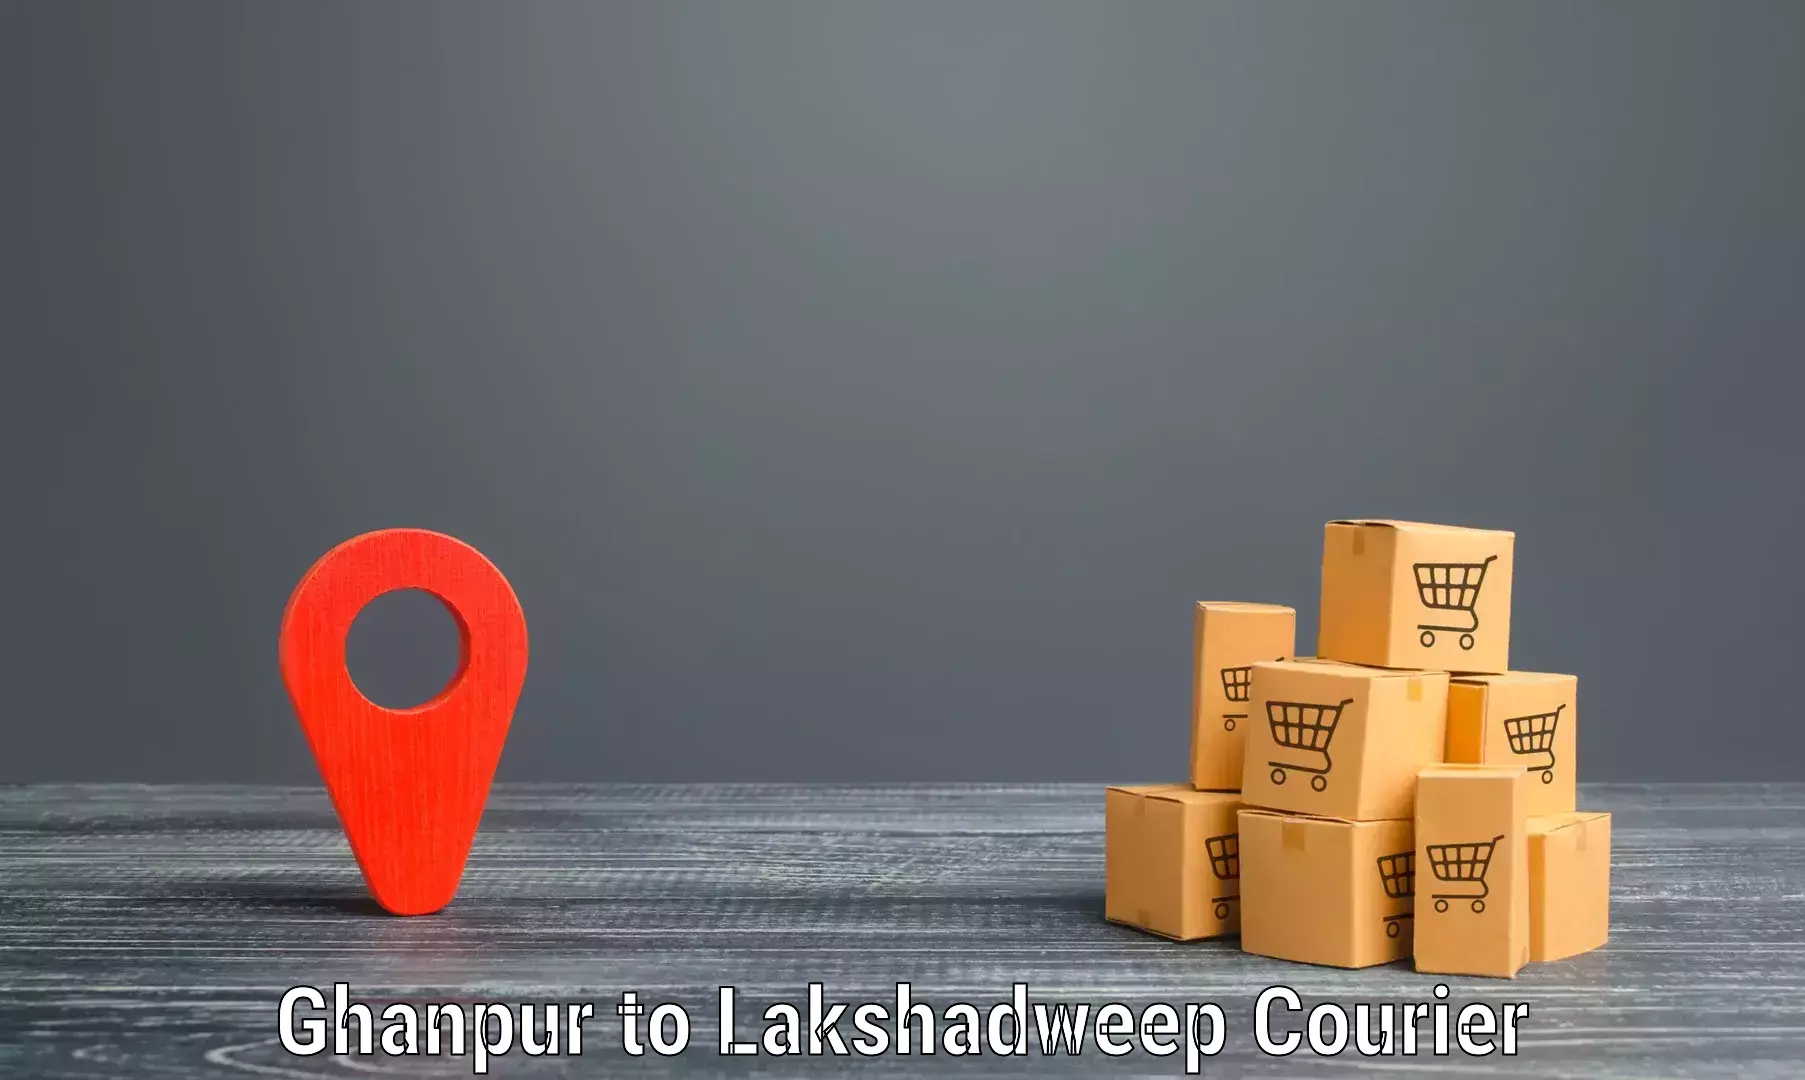 Courier service comparison in Ghanpur to Lakshadweep